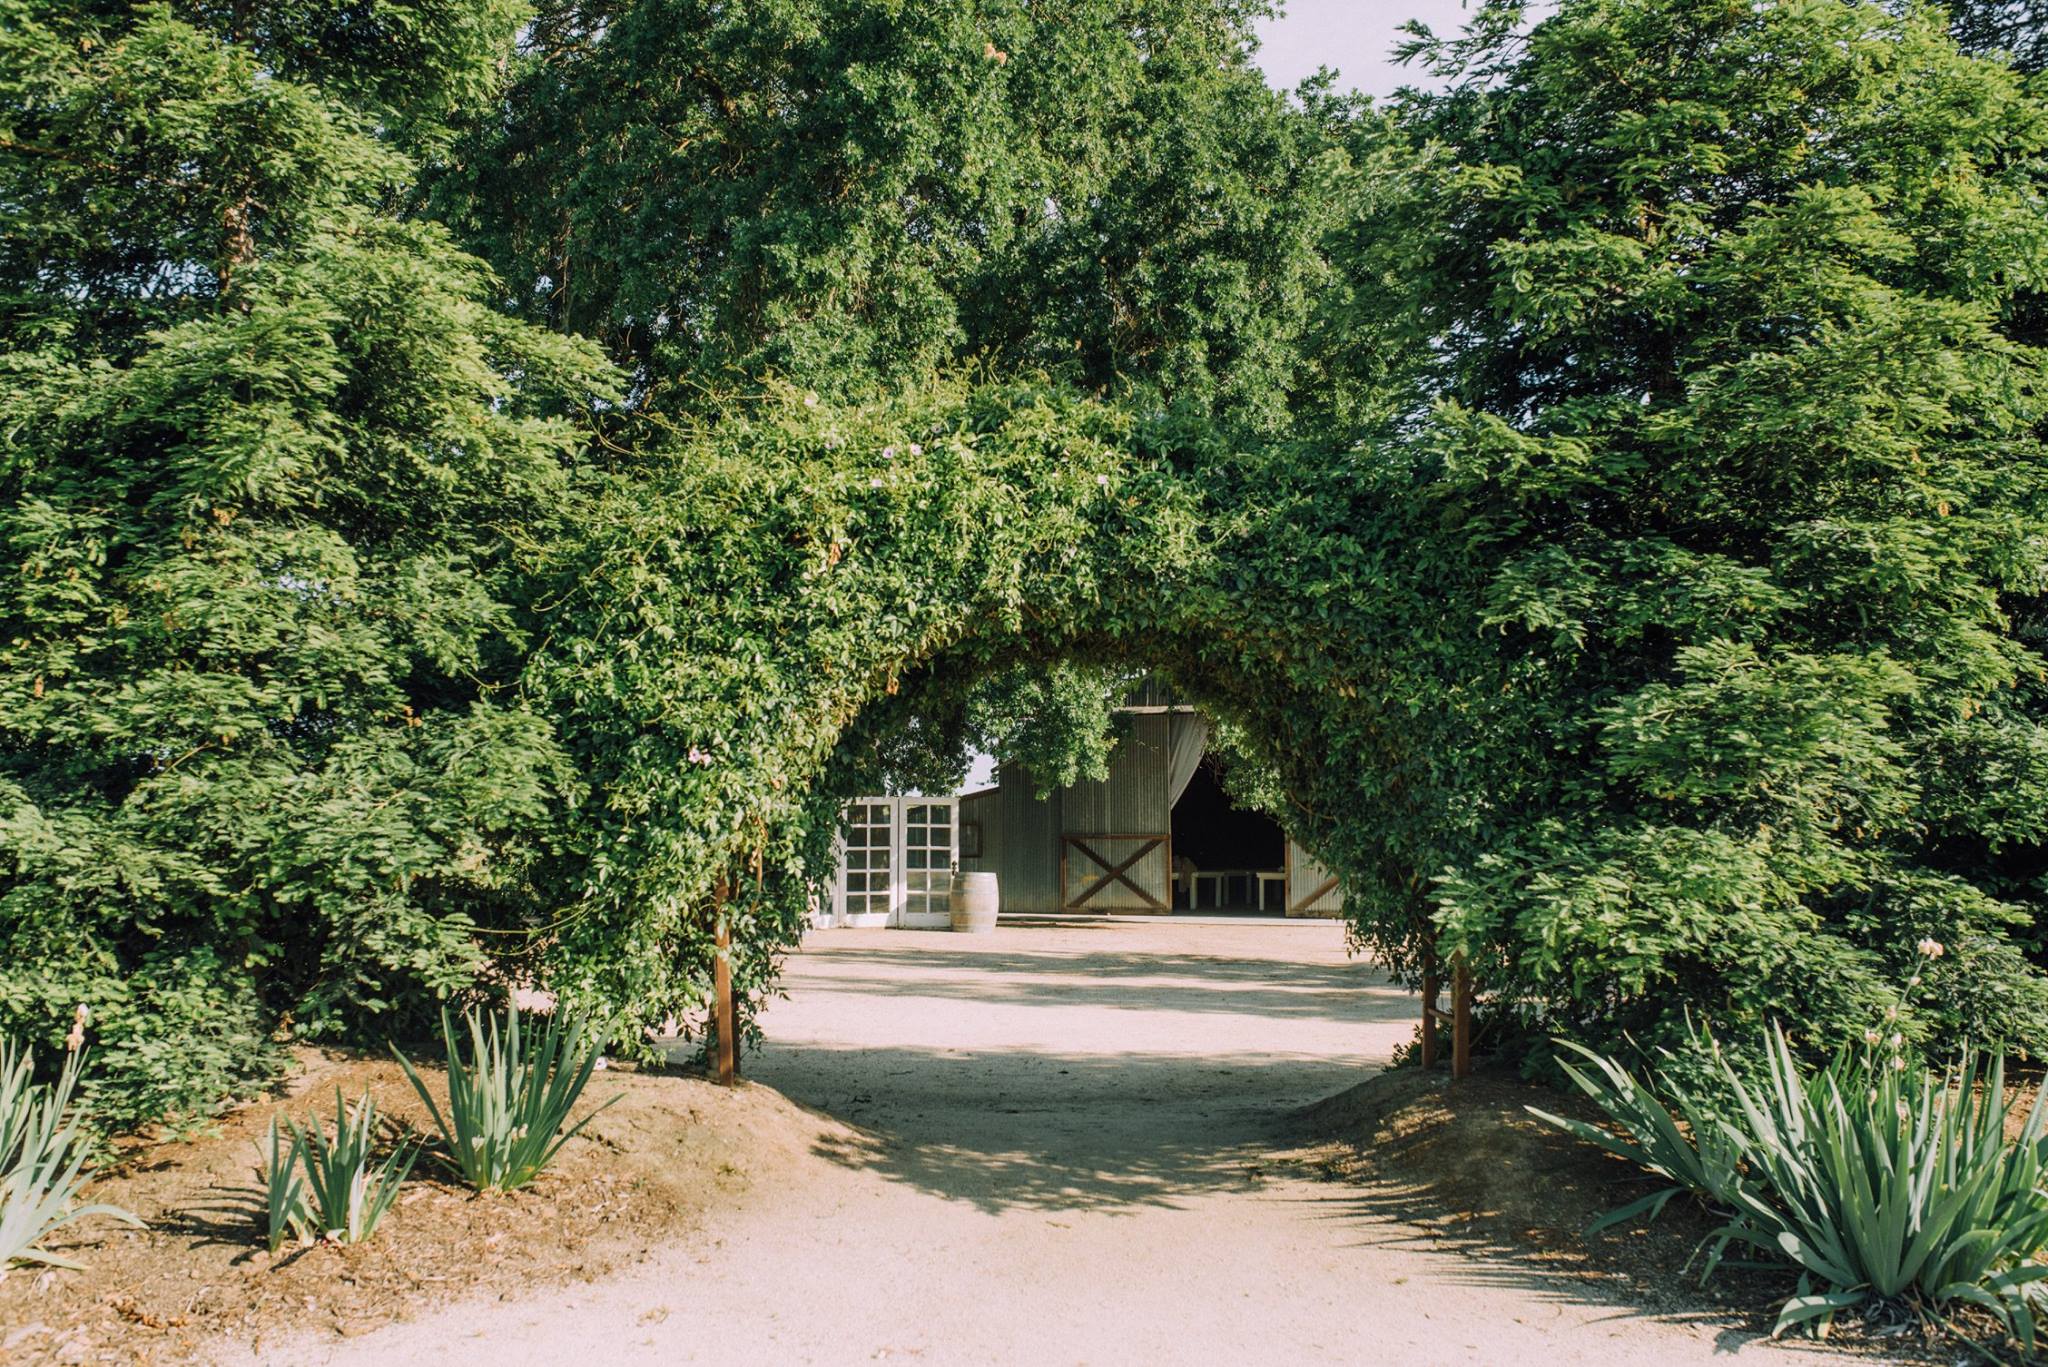 Entrance Arch at Barn at Second Wind